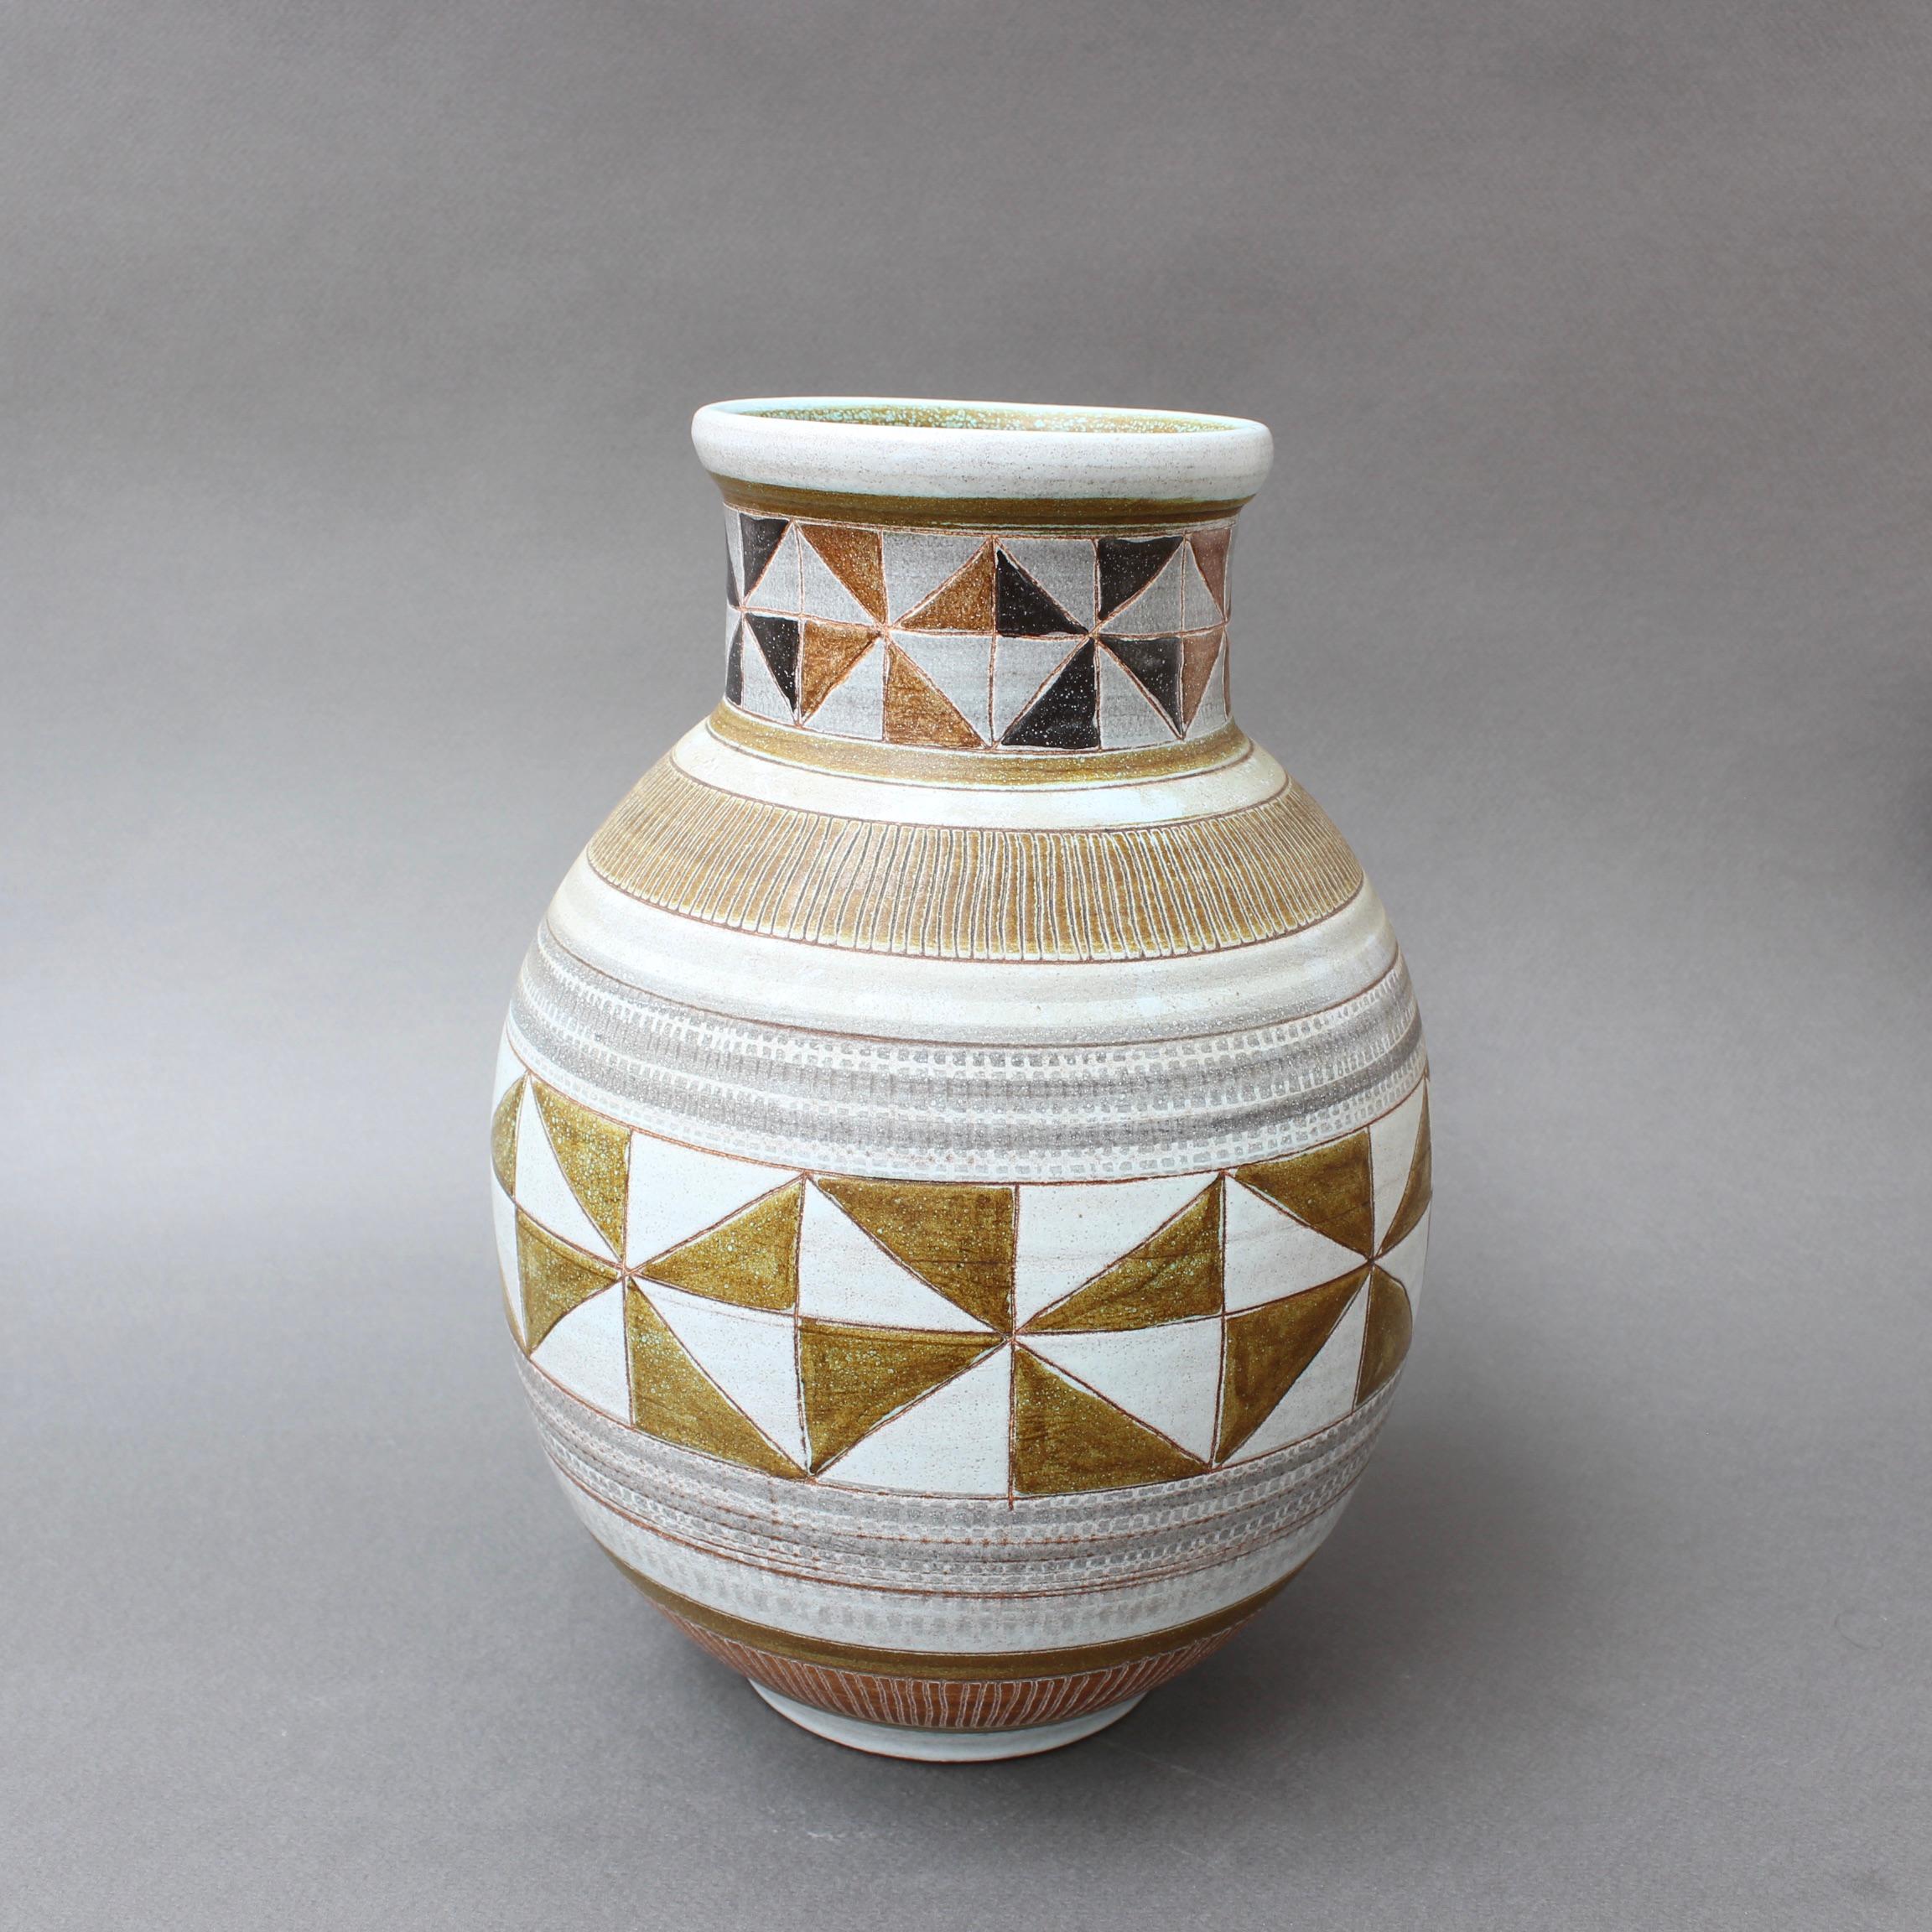 Mid-Century Modern French ceramic vase by Dominique Guillot, Vallauris, France, (circa 1960s). Classically shaped with a modern geometric motif, the vase is visually stunning and tactile at the same time. Its natural earth tones with grey-blue bands